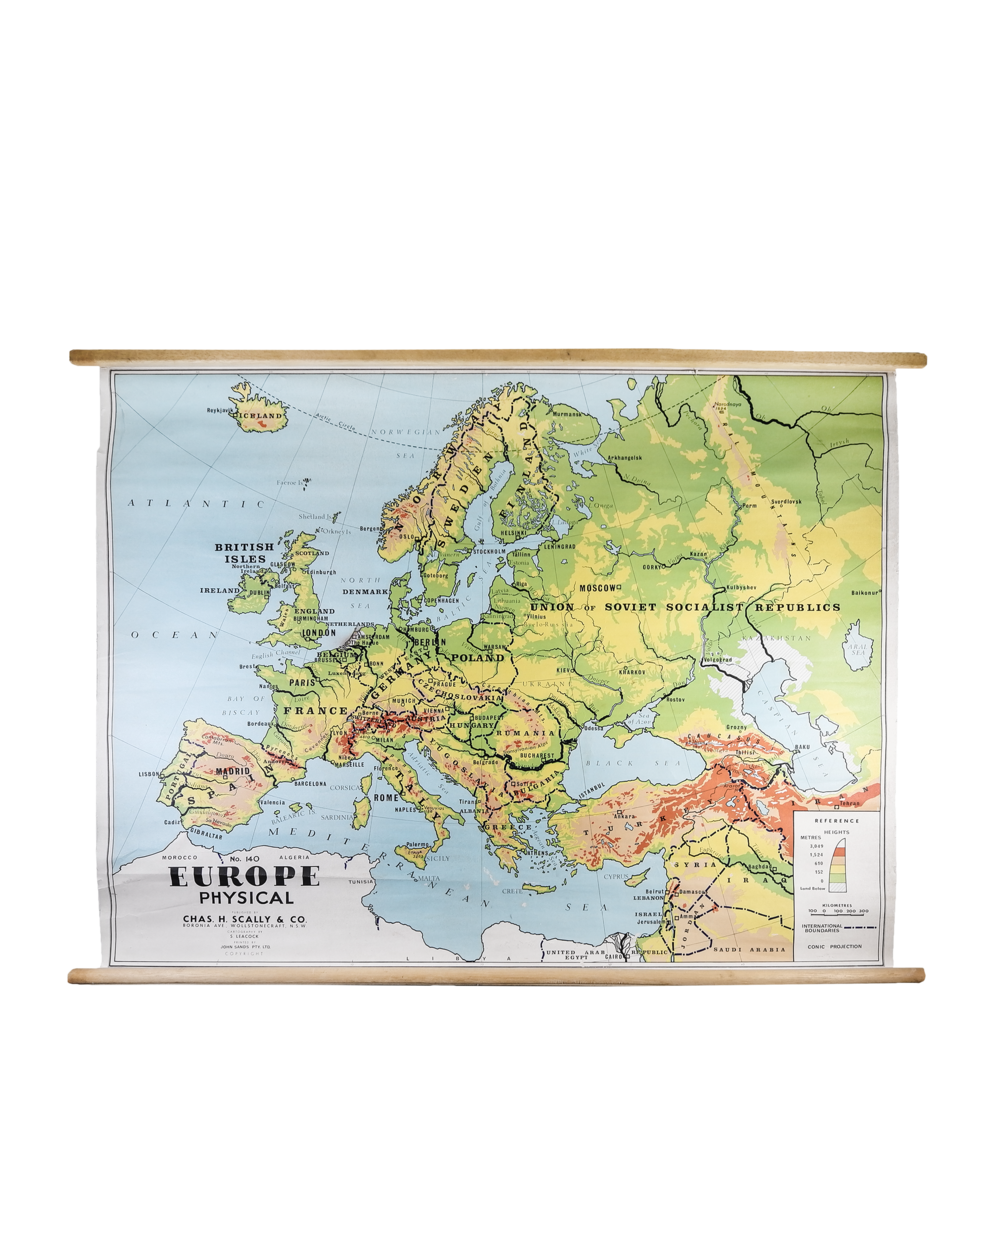 EUROPE PHYSICAL MAP